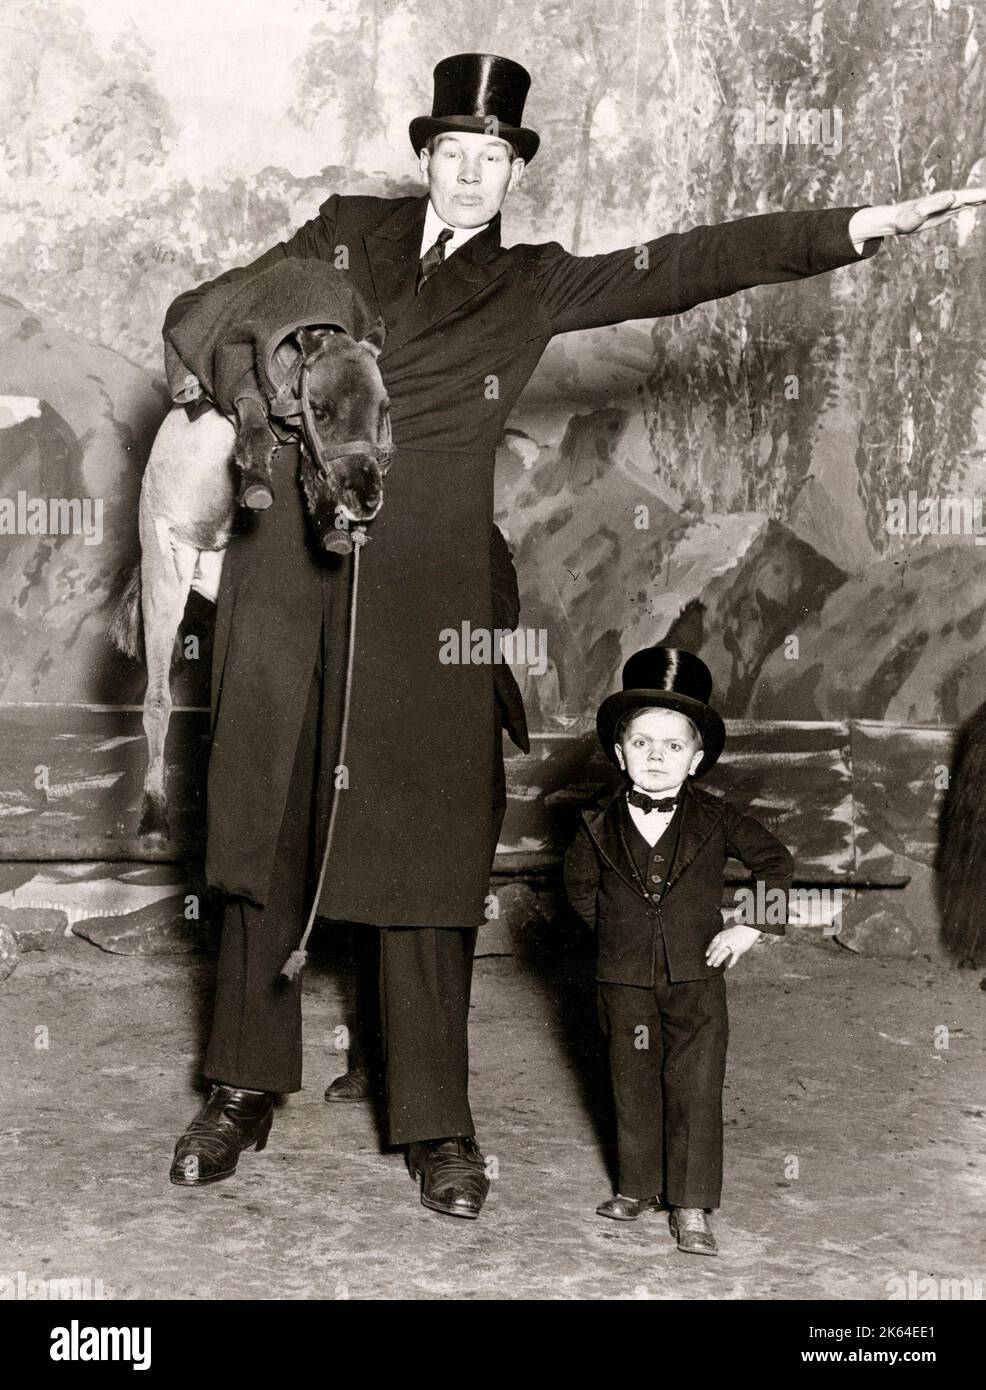 Early 20th century vintage press photograph - sideshow freak show - dwarf and giant, London c.1920s - Olympia Circus Stock Photo